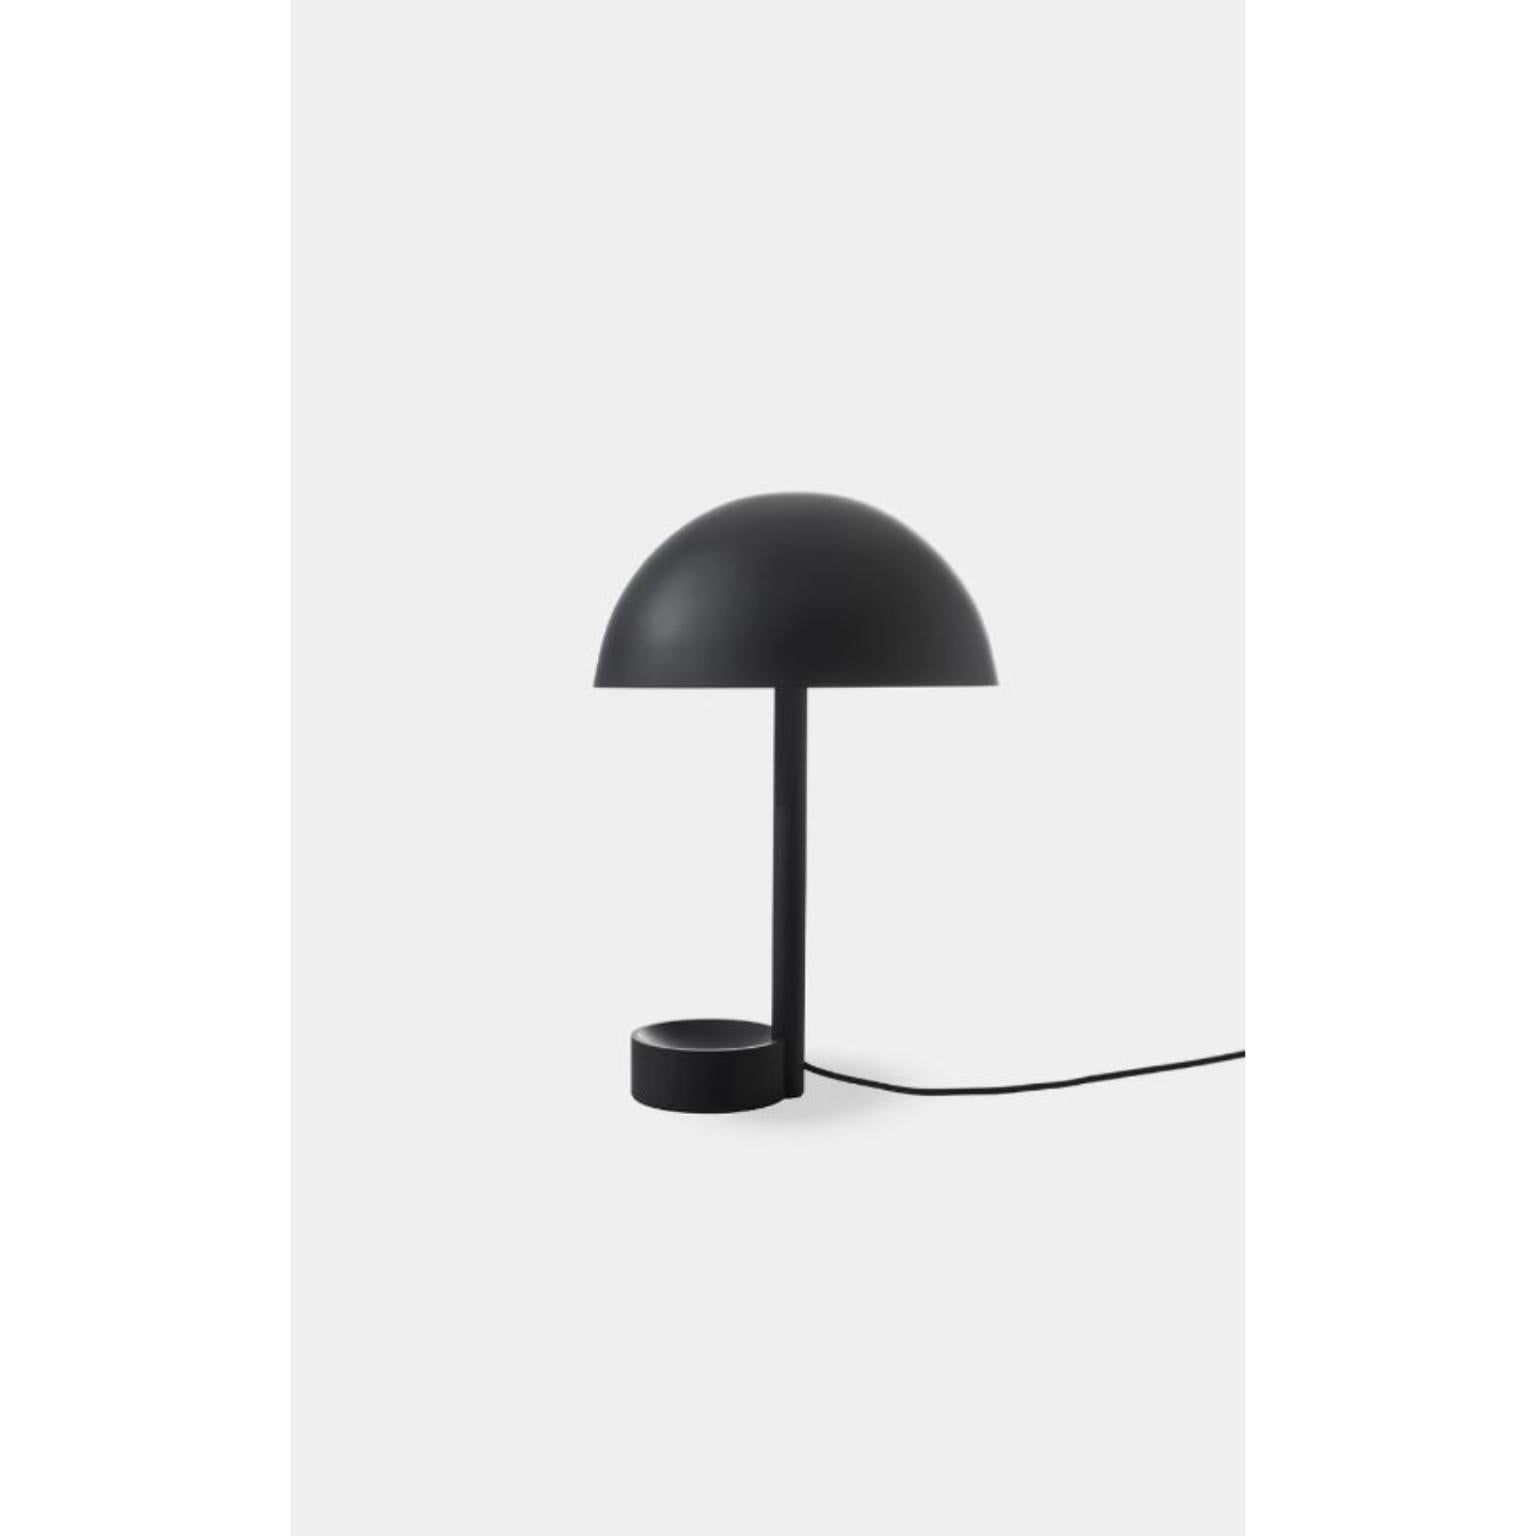 Black Copa Table Lamp by Wentz
Dimensions: D 30 x W 30 x H 45 cm
Materials: Aluminum.


WEIGHT: 2,1kg / 4,6 lbs
Colors: Black, White, Sand, Leaf Green.
LIGHT SOURCE: 150lm. 2700K. 90 CRI.
DIMMING No. Consult-us for dimming systems.
VOLTAGE: